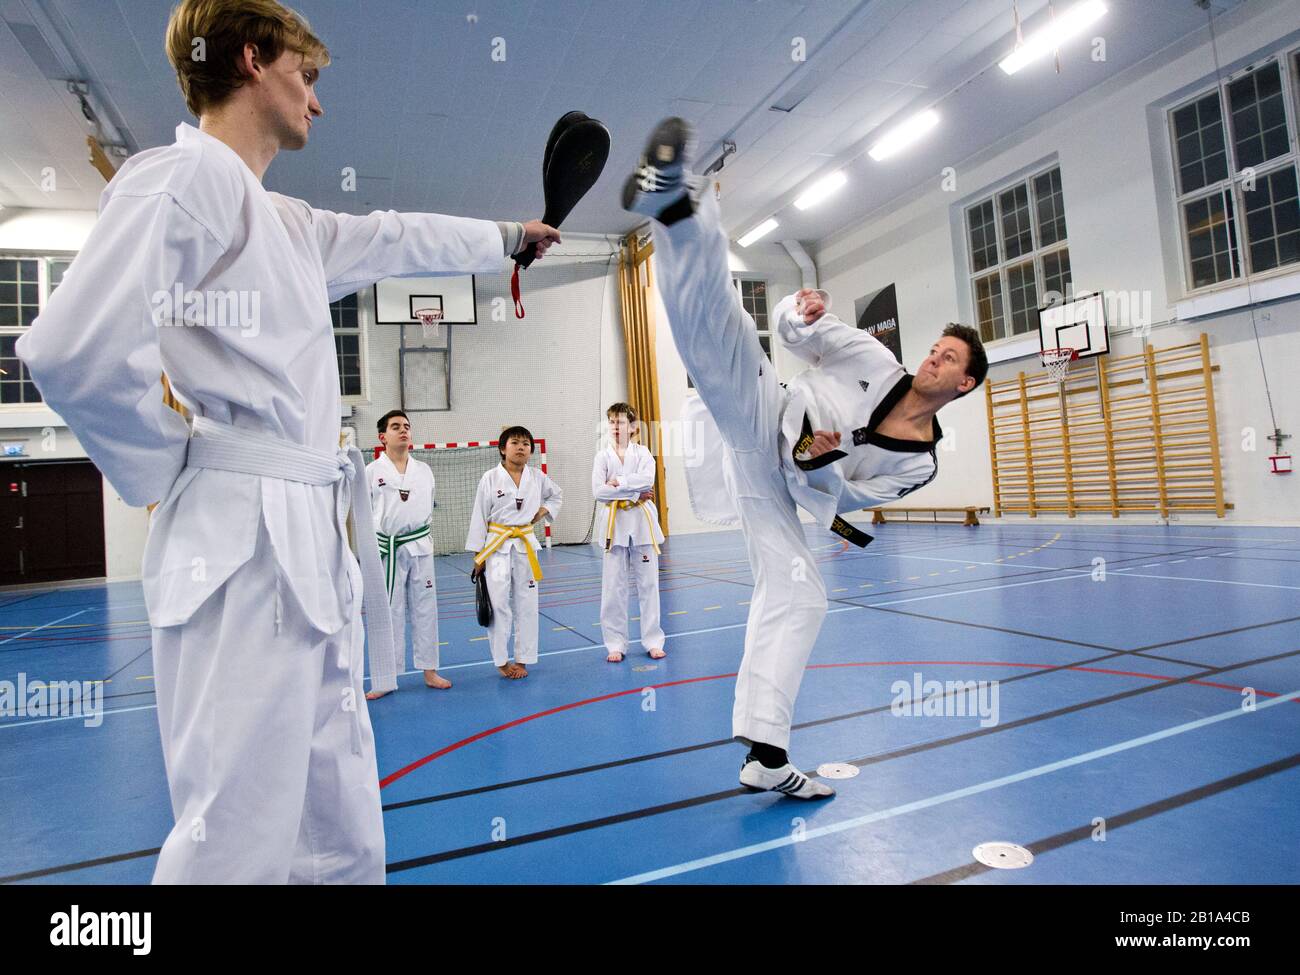 Young people practicing taekwondo. Taekwondo, Tae Kwon Do or Taekwon-Do is a Korean martial art, characterized by its emphasis on head-height kicks, jumping and spinning kicks, and fast kicking techniques.Photo Jeppe Gustafsson Stock Photo